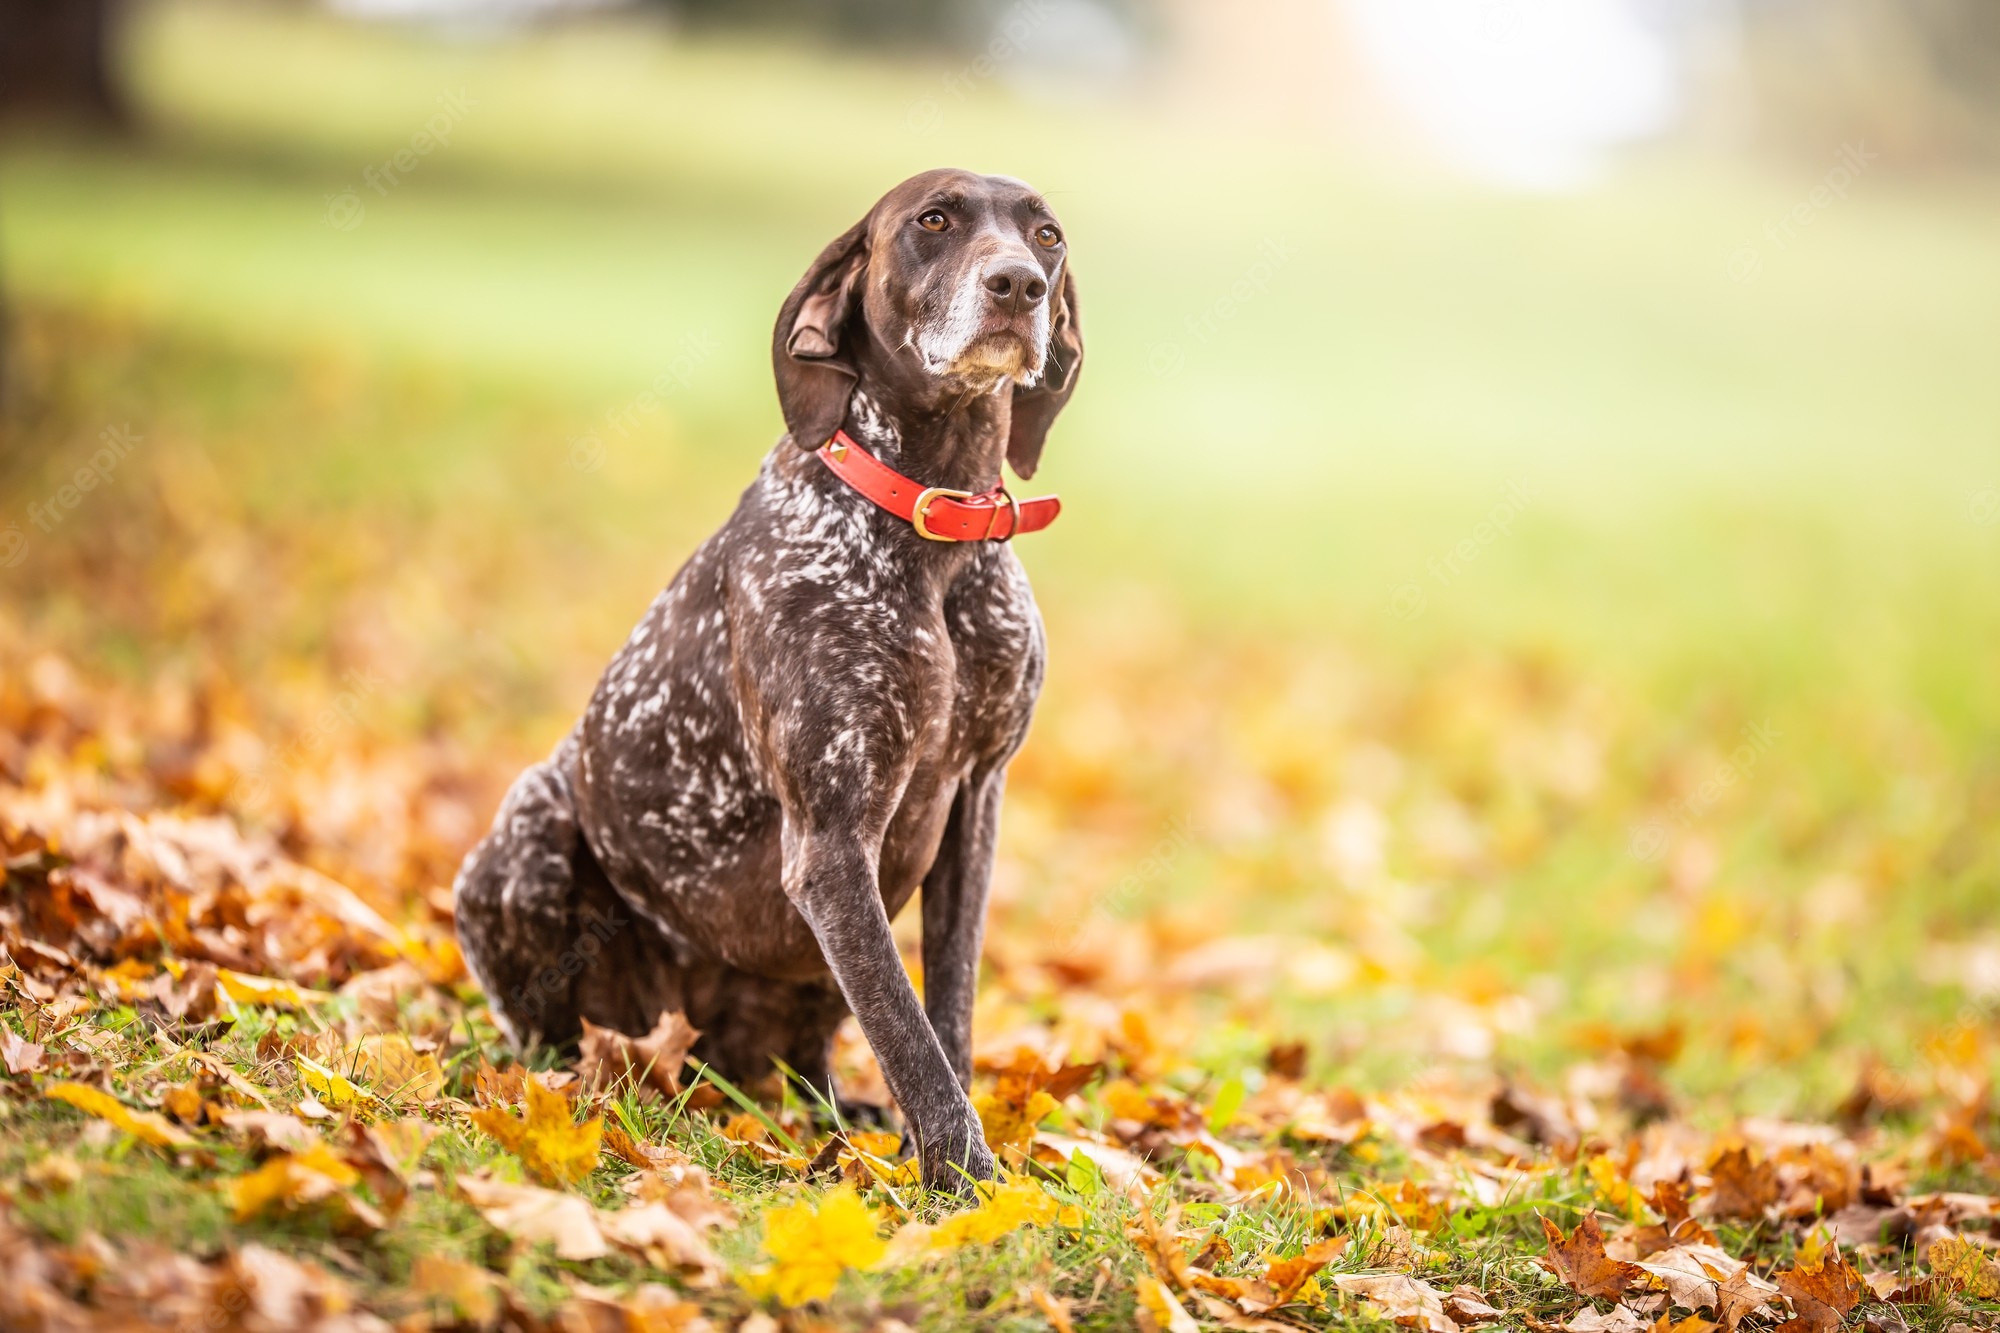 German Shorthaired Pointers Image. Free Vectors, & PSD